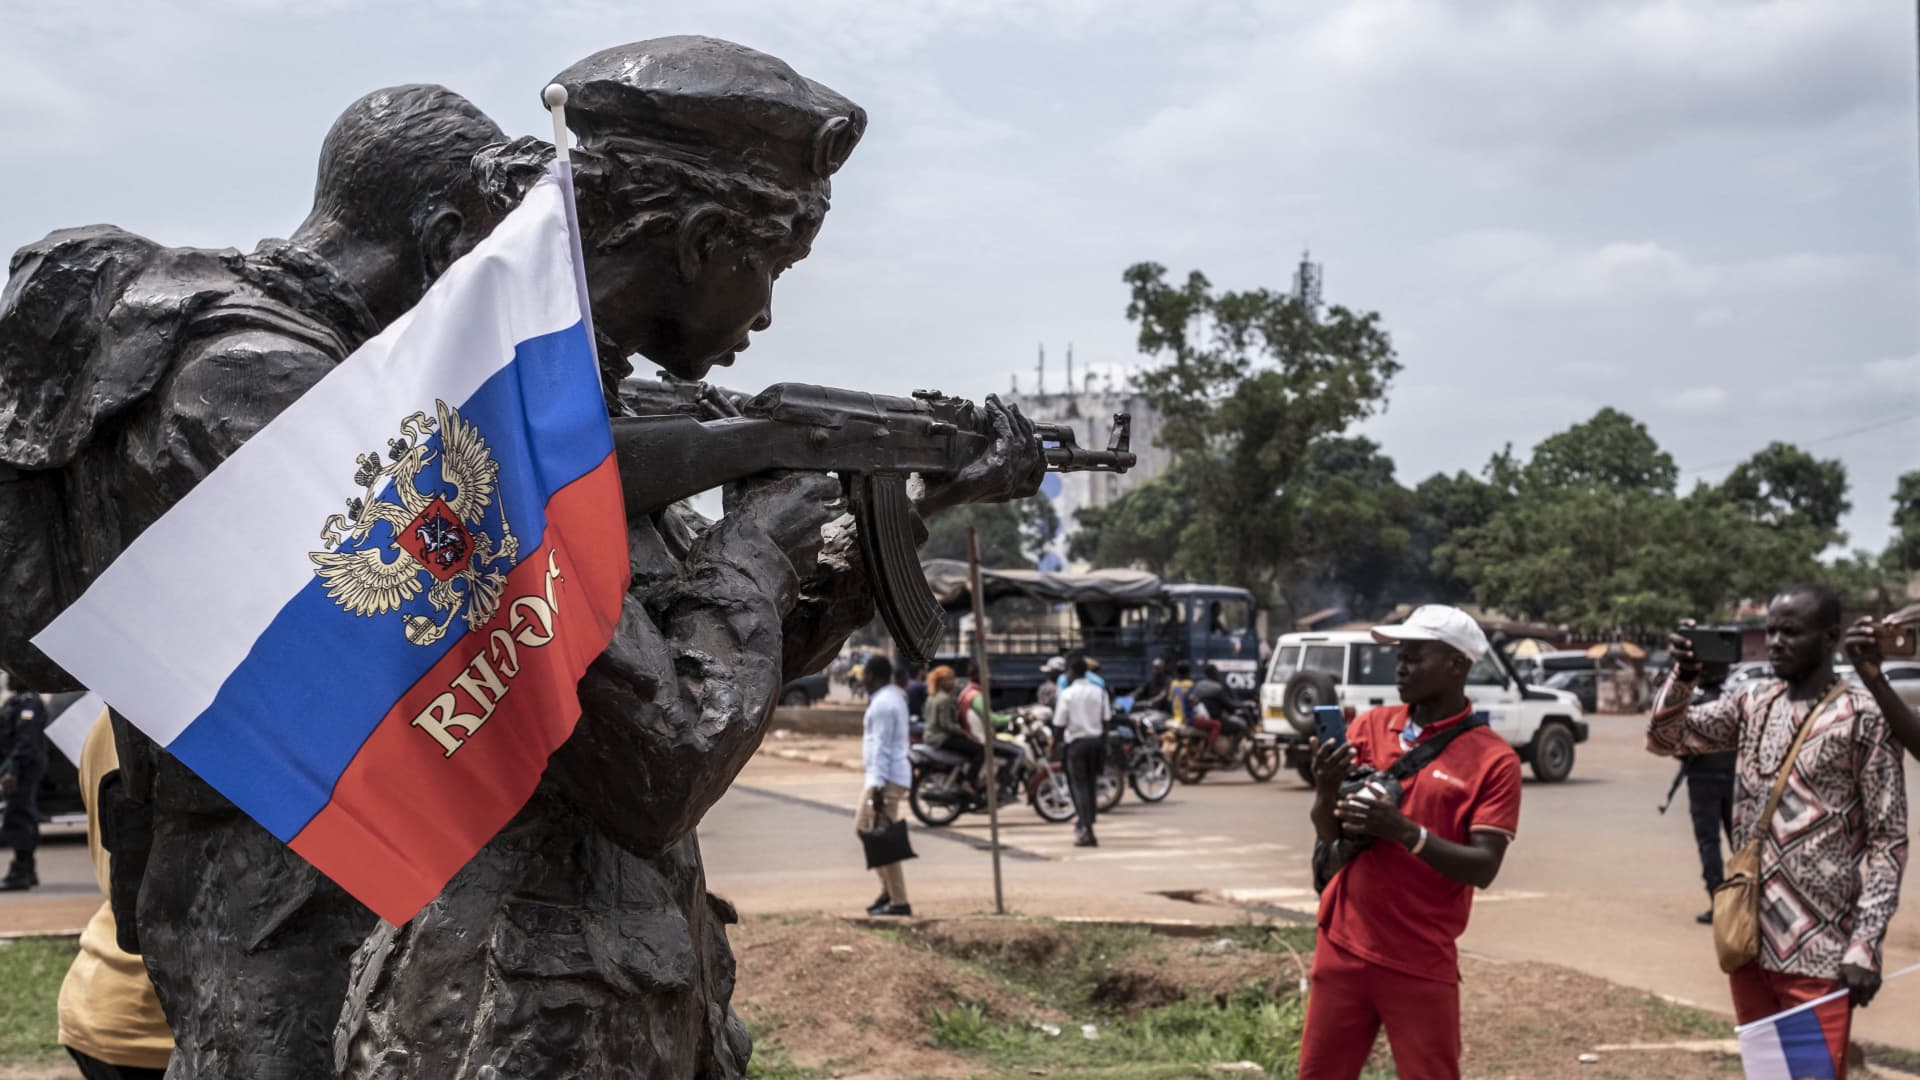 BANGUI, Central African Republic - March 22, 2023: A Russian flag hangs on the monument of the Russian instructors in Bangui, during a march in support of Russia and China's presence in the Central African Republic. Wagner Group has been active in the country since 2018, supporting President Faustin-Archange Touadéra's government and filling a security vacuum left by France.